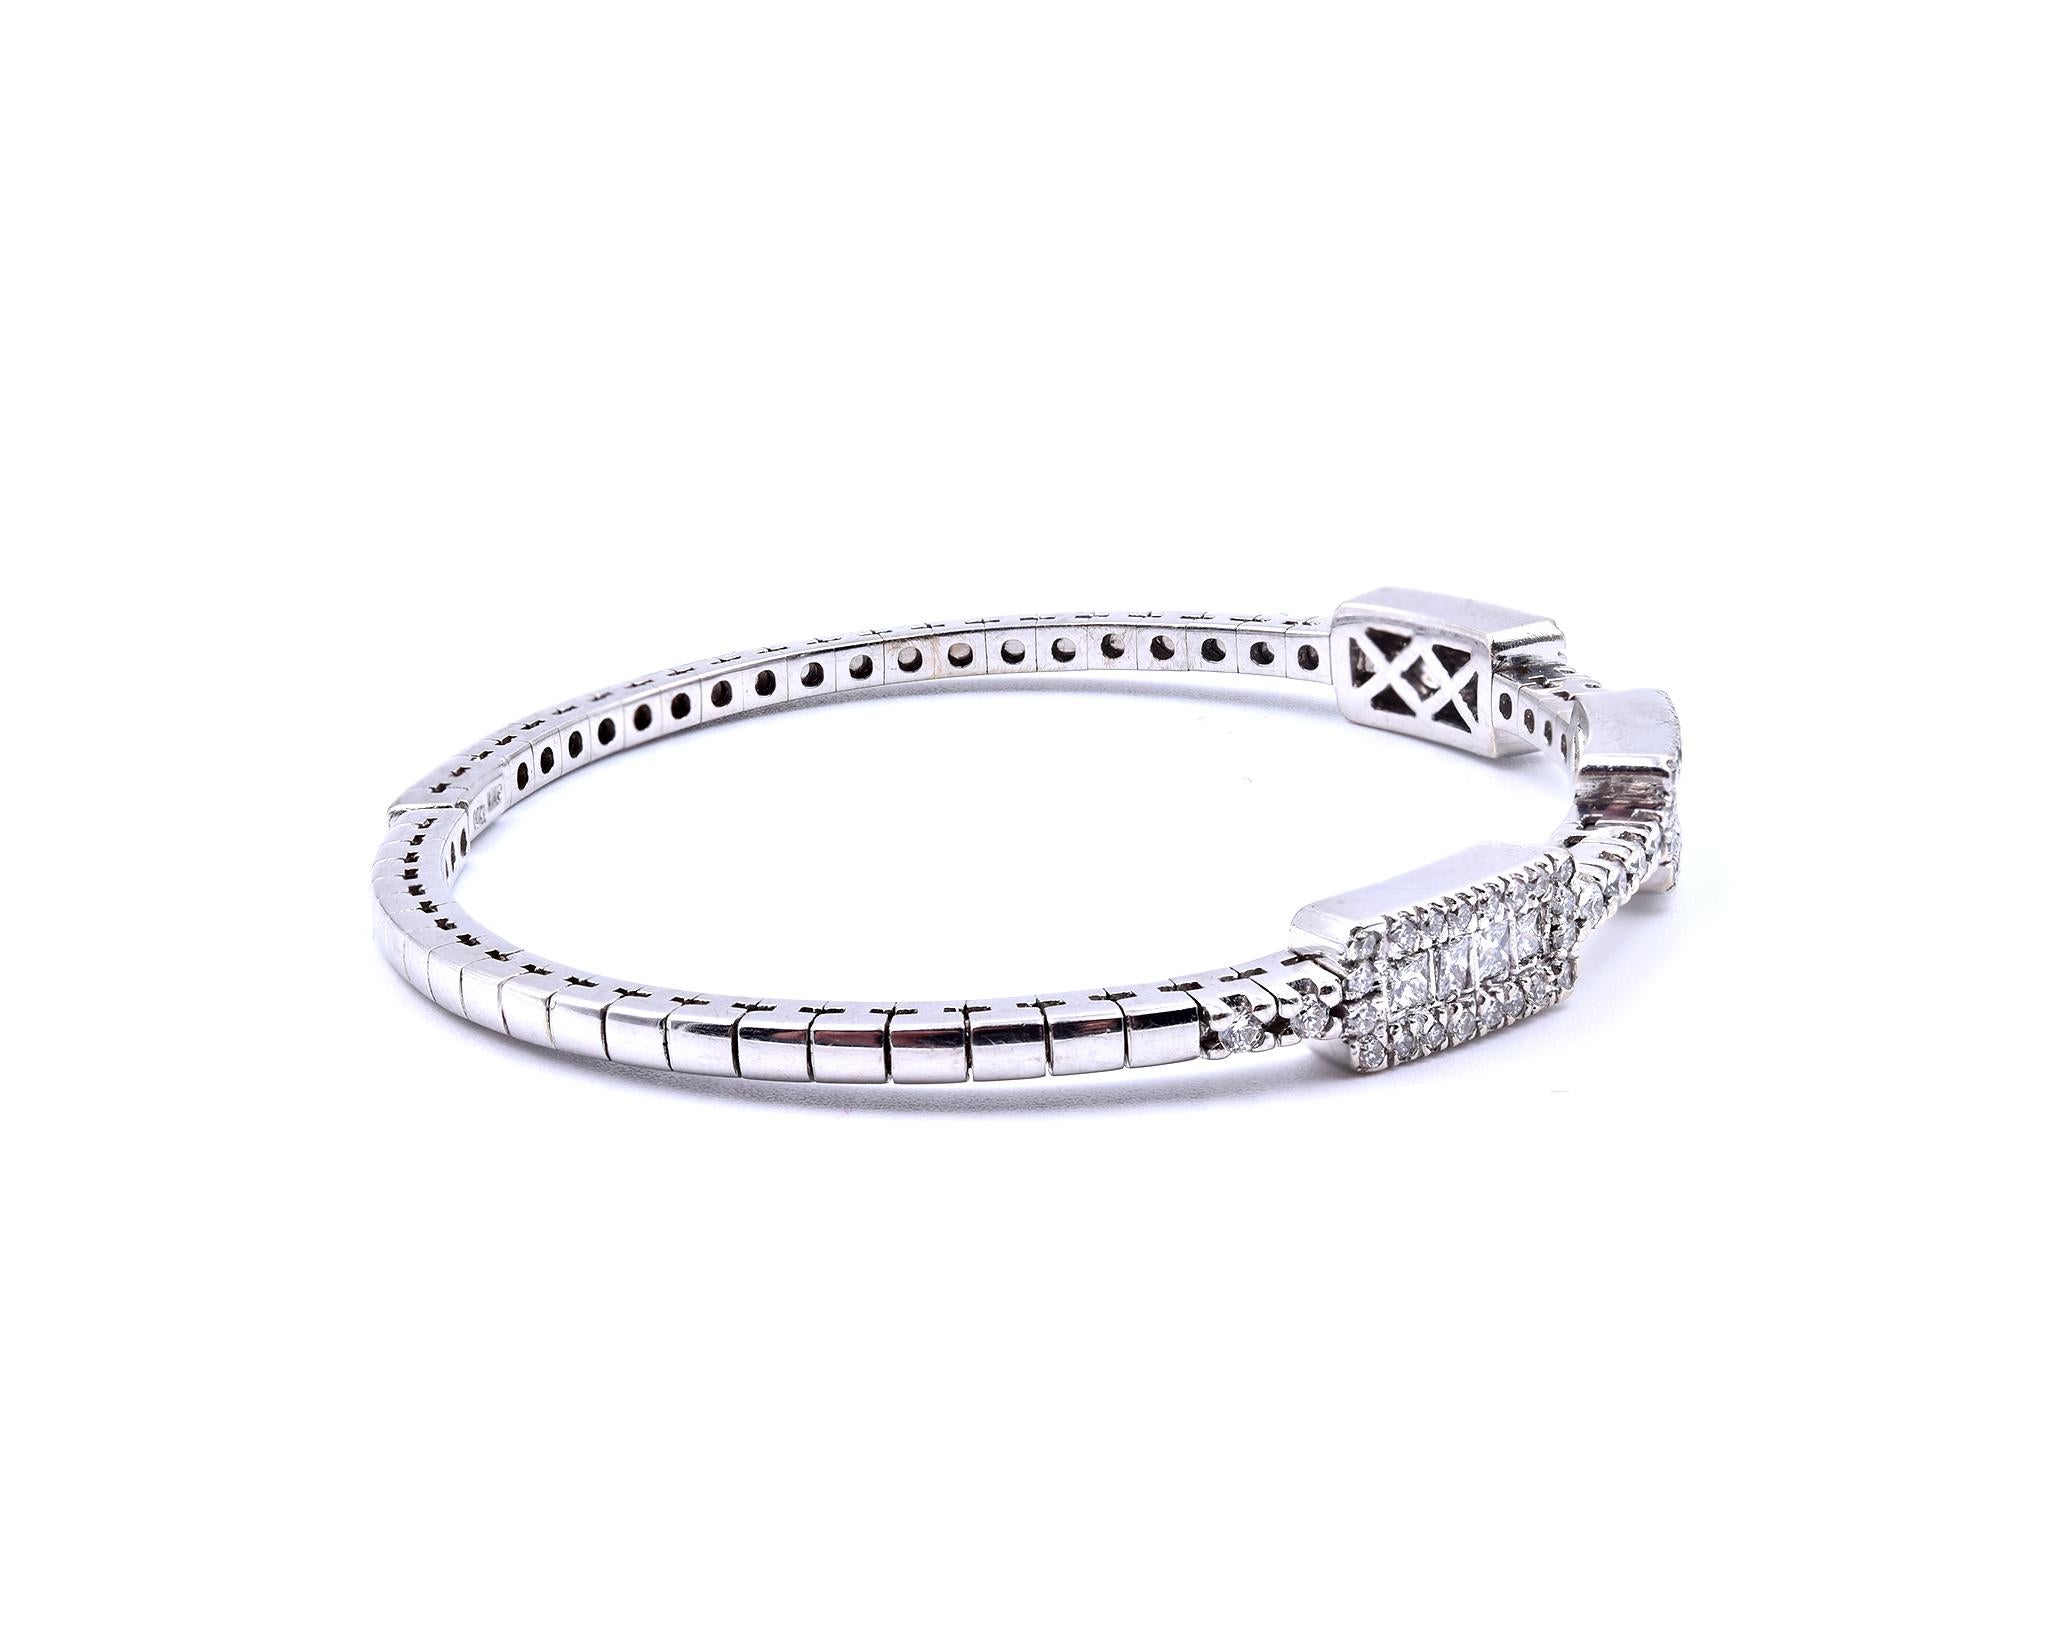 Designer: custom designed
Material: 18k white gold
Diamonds: 12 princess cut= .36cttw
Color: G
Clarity: VS
Diamonds: 72 round brilliant cut= 1.20cttw
Color: G
Clarity: VS
Dimensions: bracelet is 6 ½-inches long and it is 6mm wide
Weight: 20.28 grams
